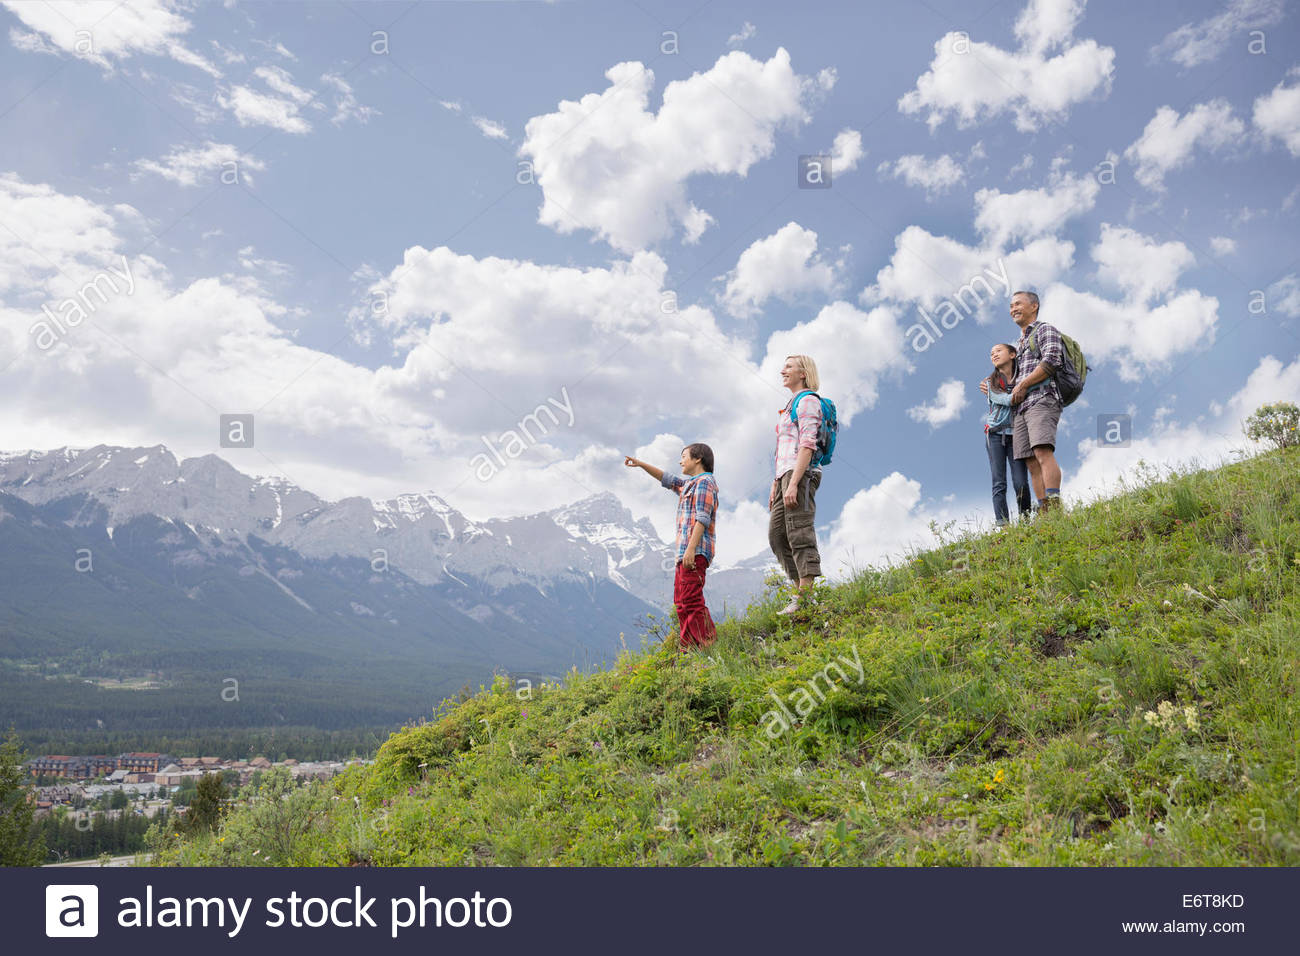 Family overlooking view from rural hillside Stock Photo